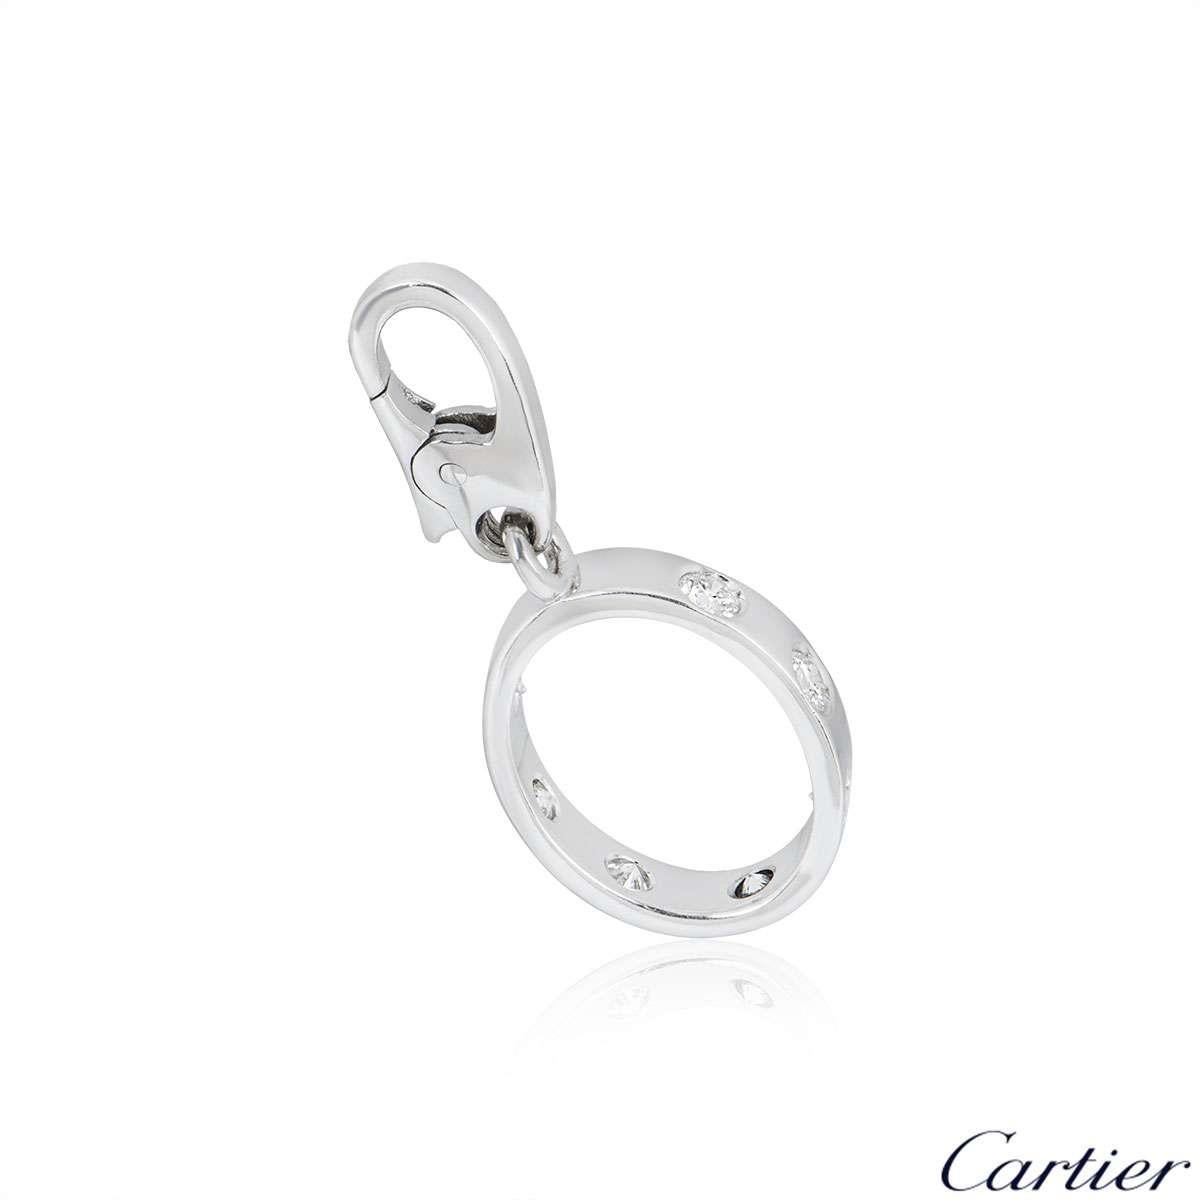 An 18k white gold Love charm by Cartier. The oval shape charm features 7 round brilliant cut diamonds set around the outer edge, totalling approximately 0.30ct. The charm measures 2.5cm in length and has an original lobster clasp. The charm has a